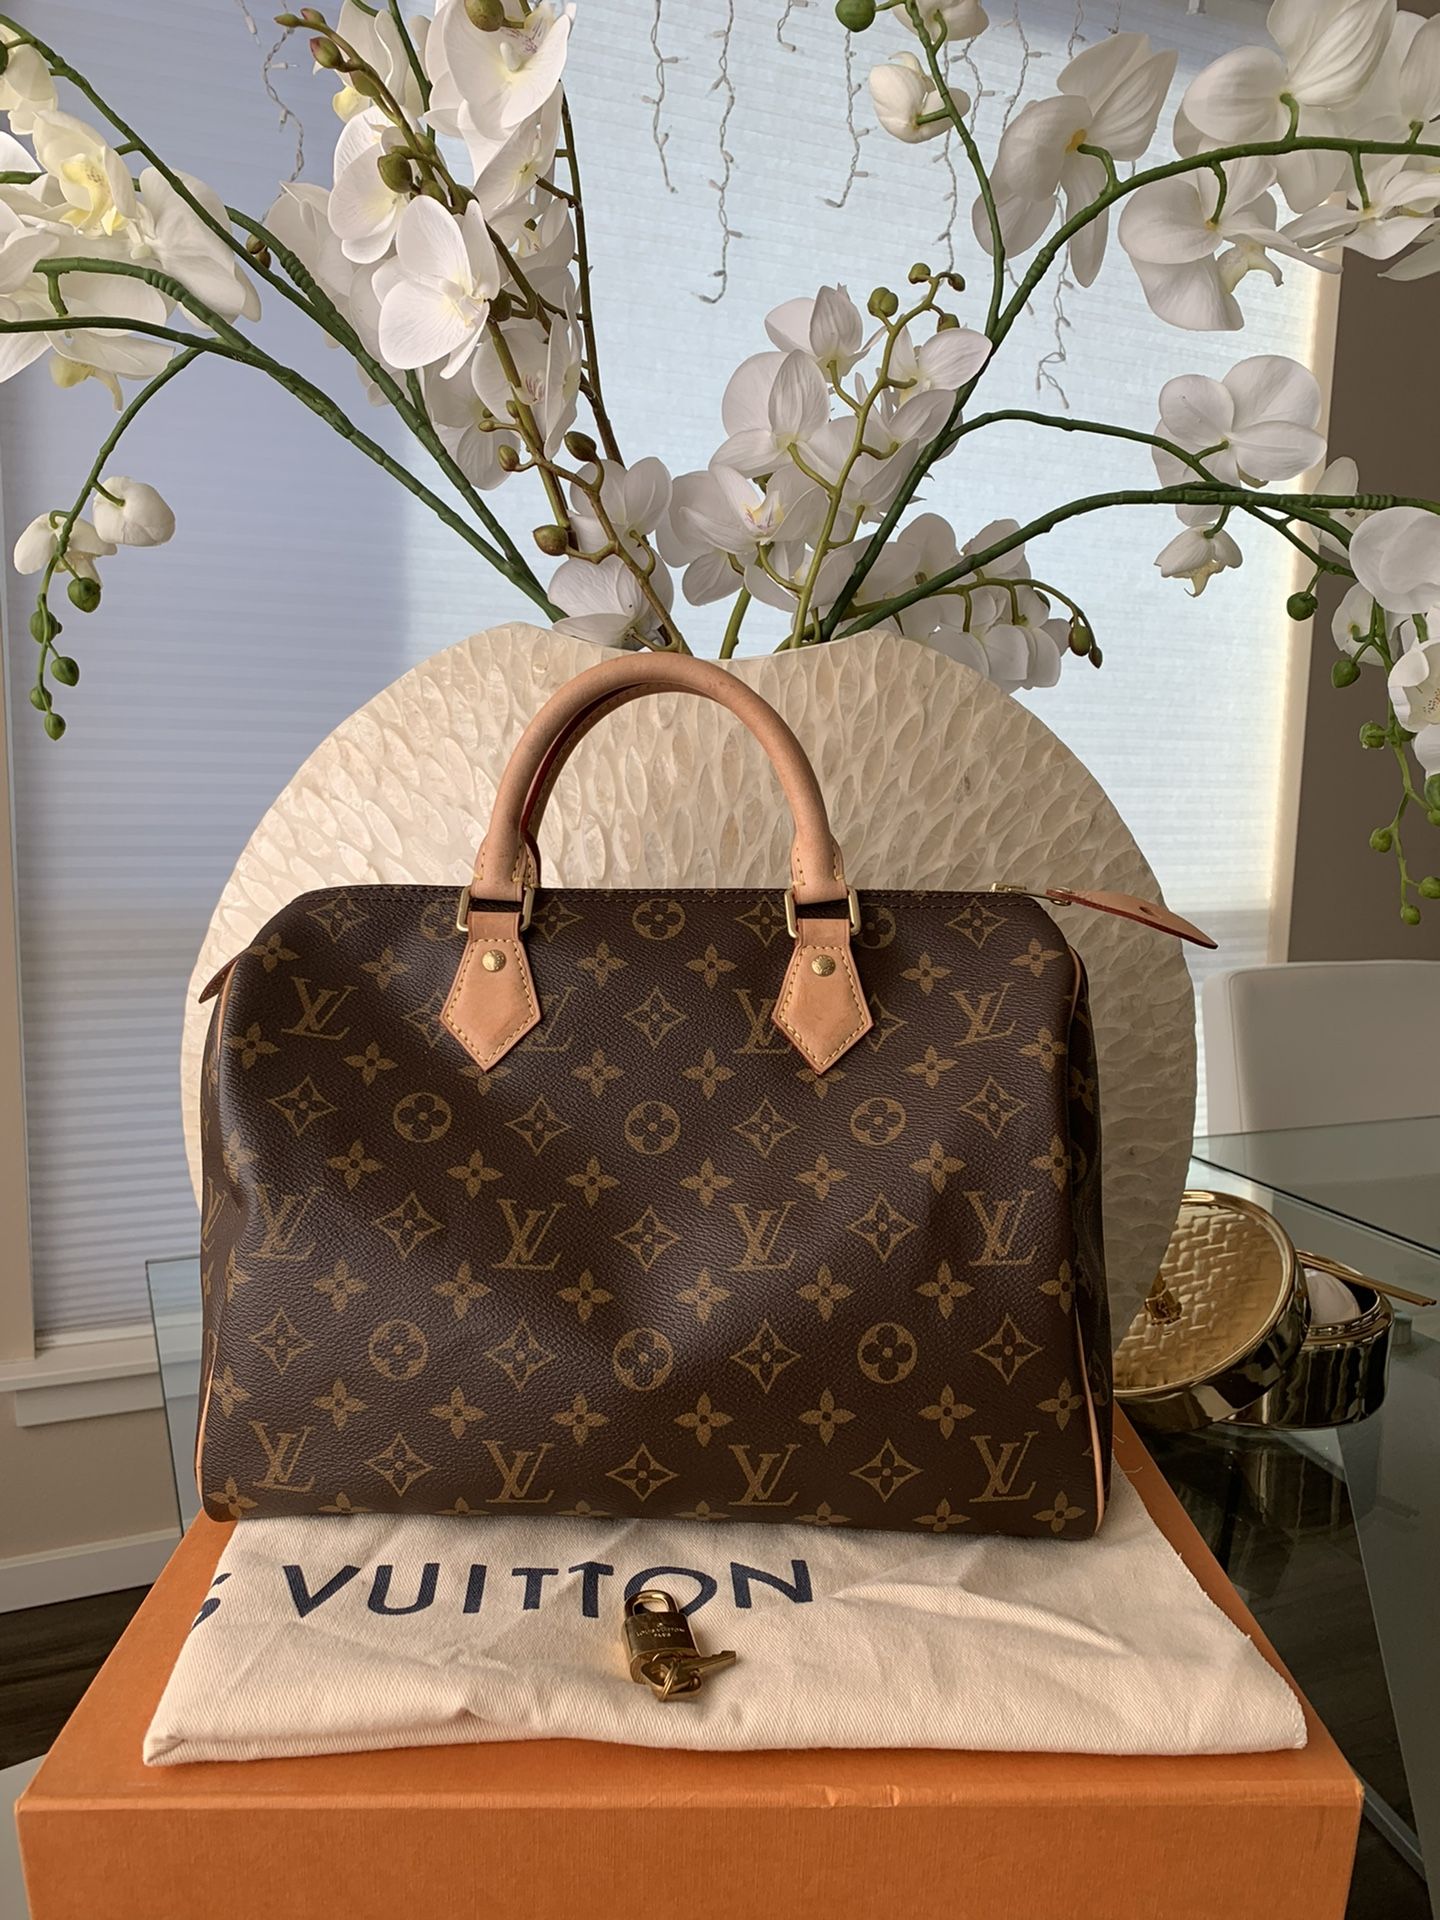 Authentic Louis Vuitton Speedy 30 for Sale in Kent, WA - OfferUp